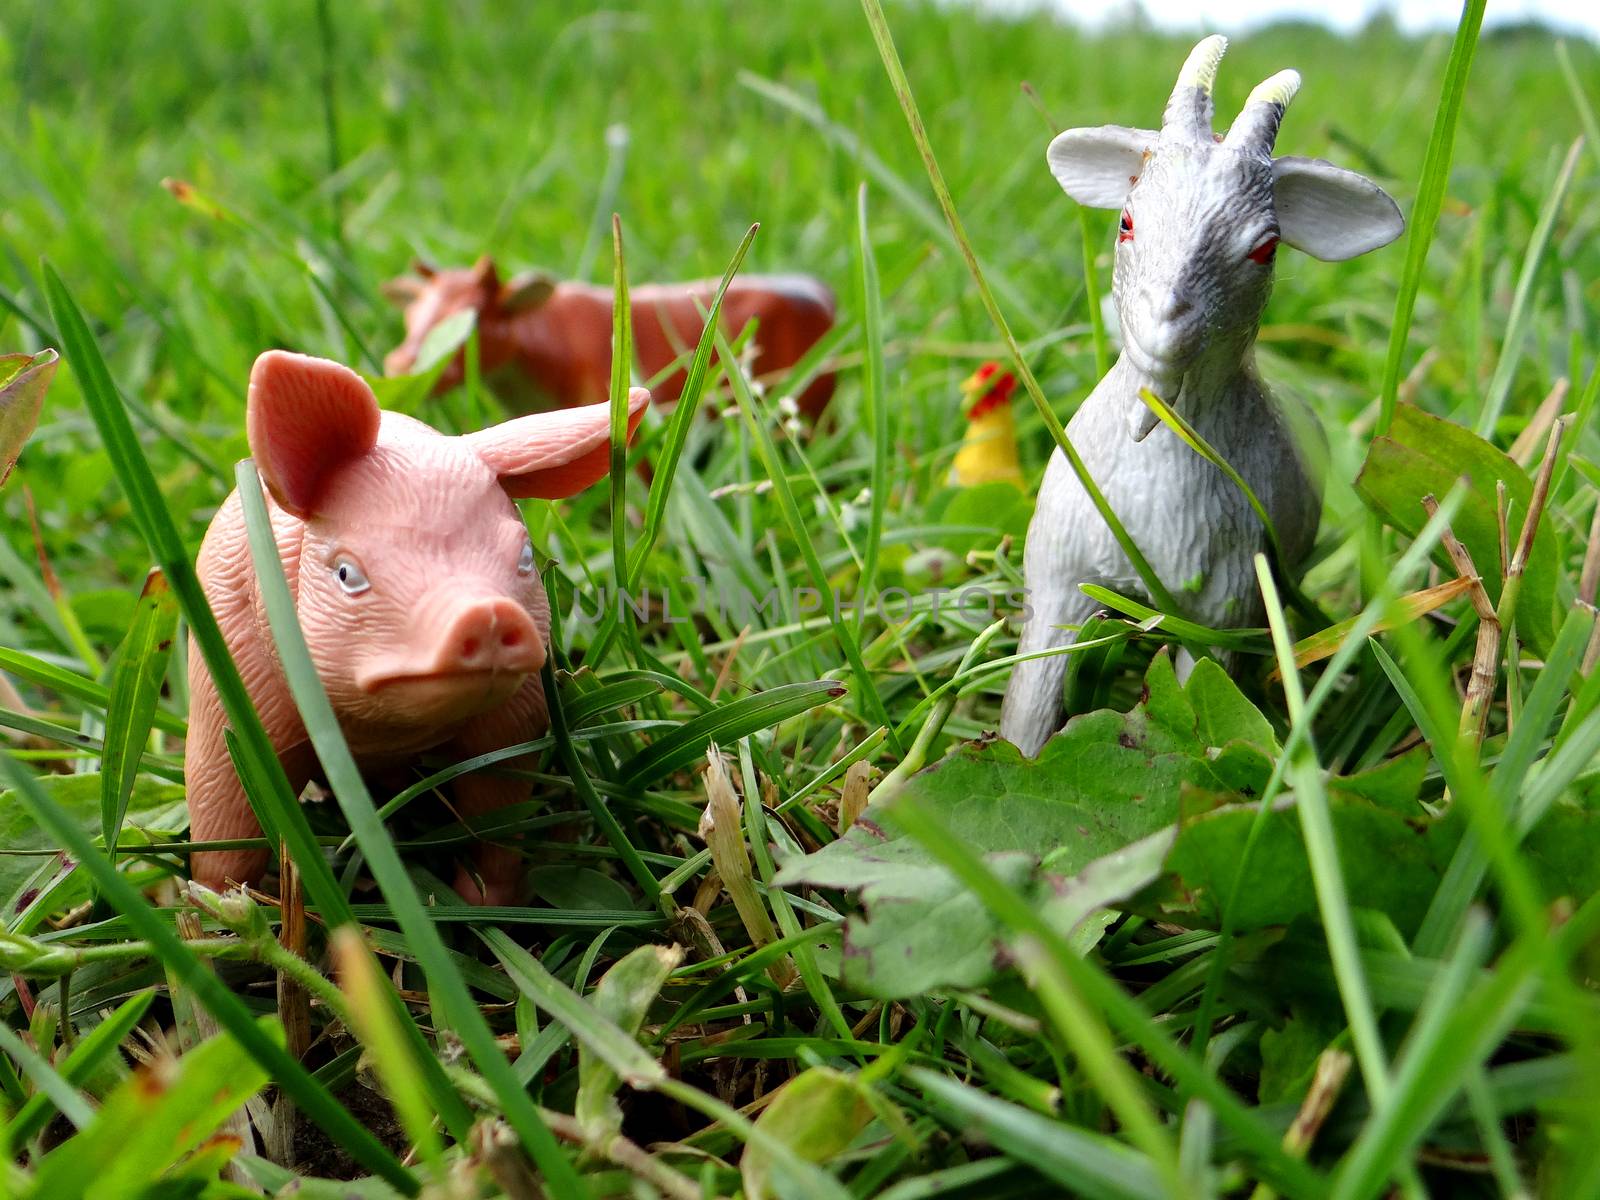 Miniature toy of farm animals in the grass